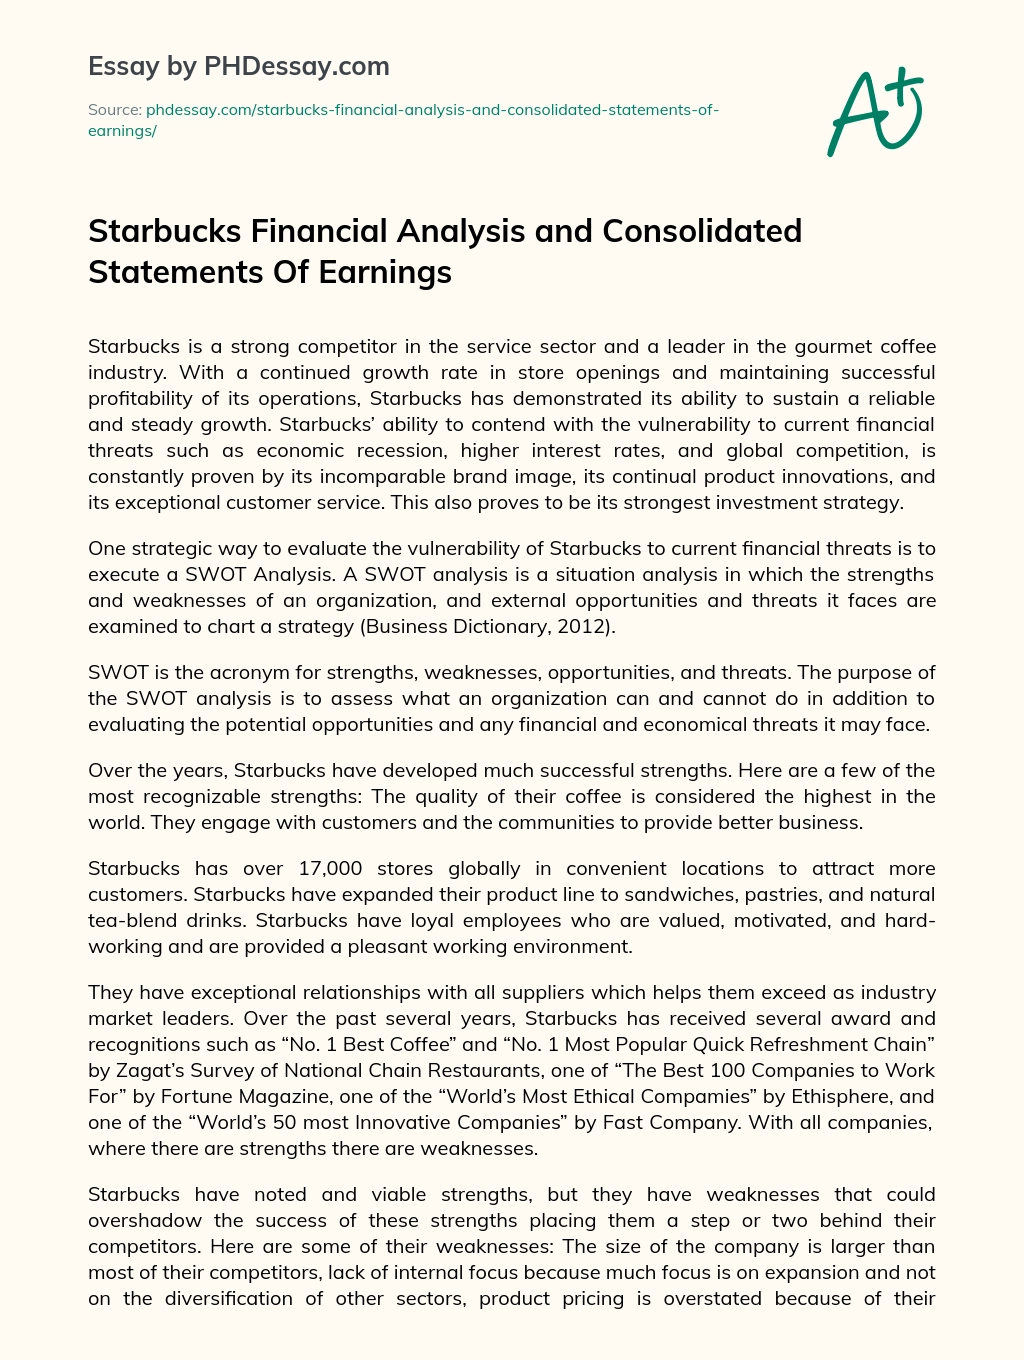 Starbucks Financial Analysis and Consolidated Statements Of Earnings essay